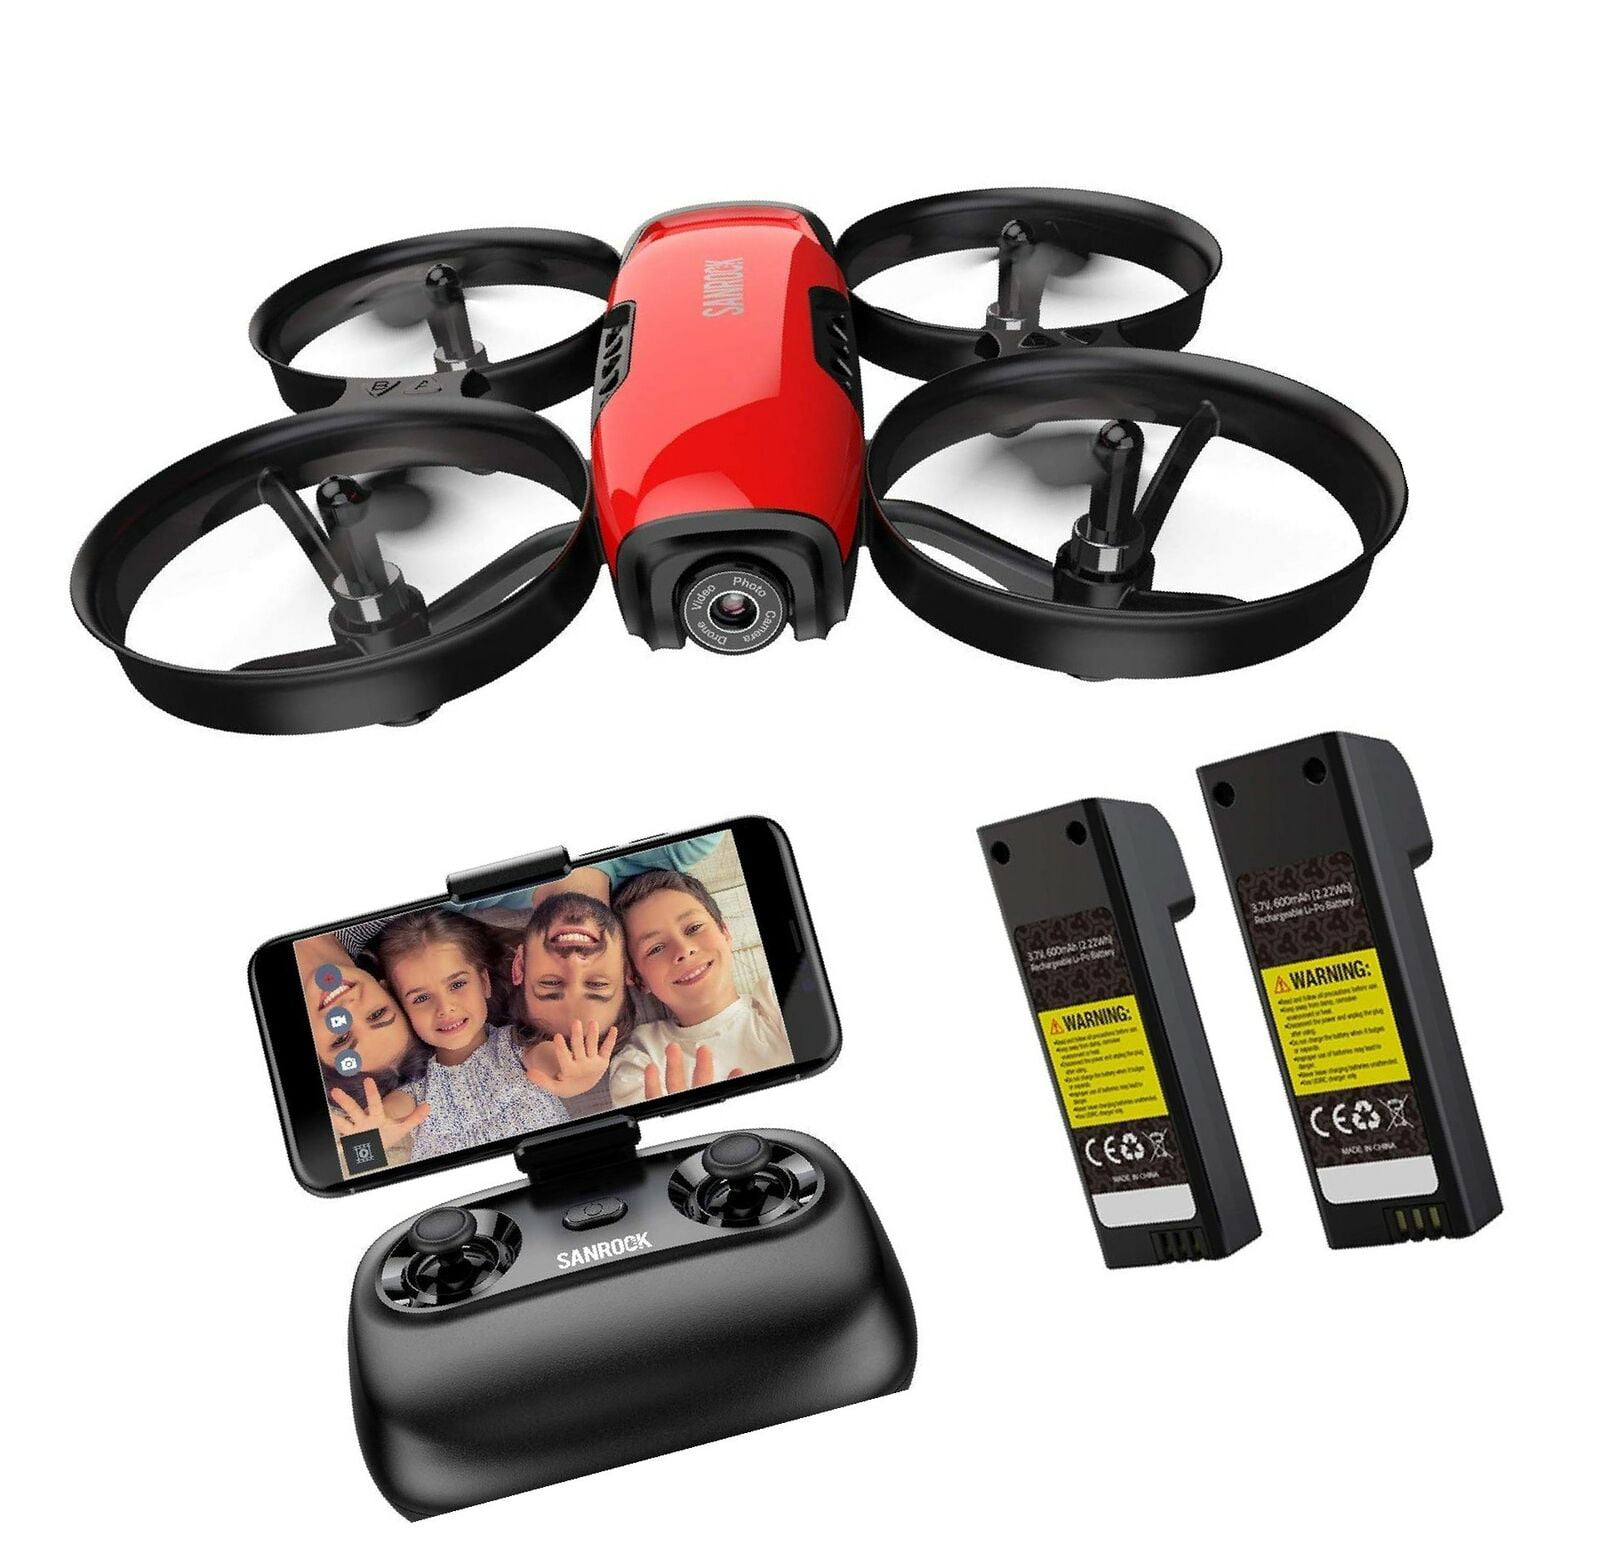 SANROCK U61W Drone - with Camera for Kids Adult Beginner 720P HD